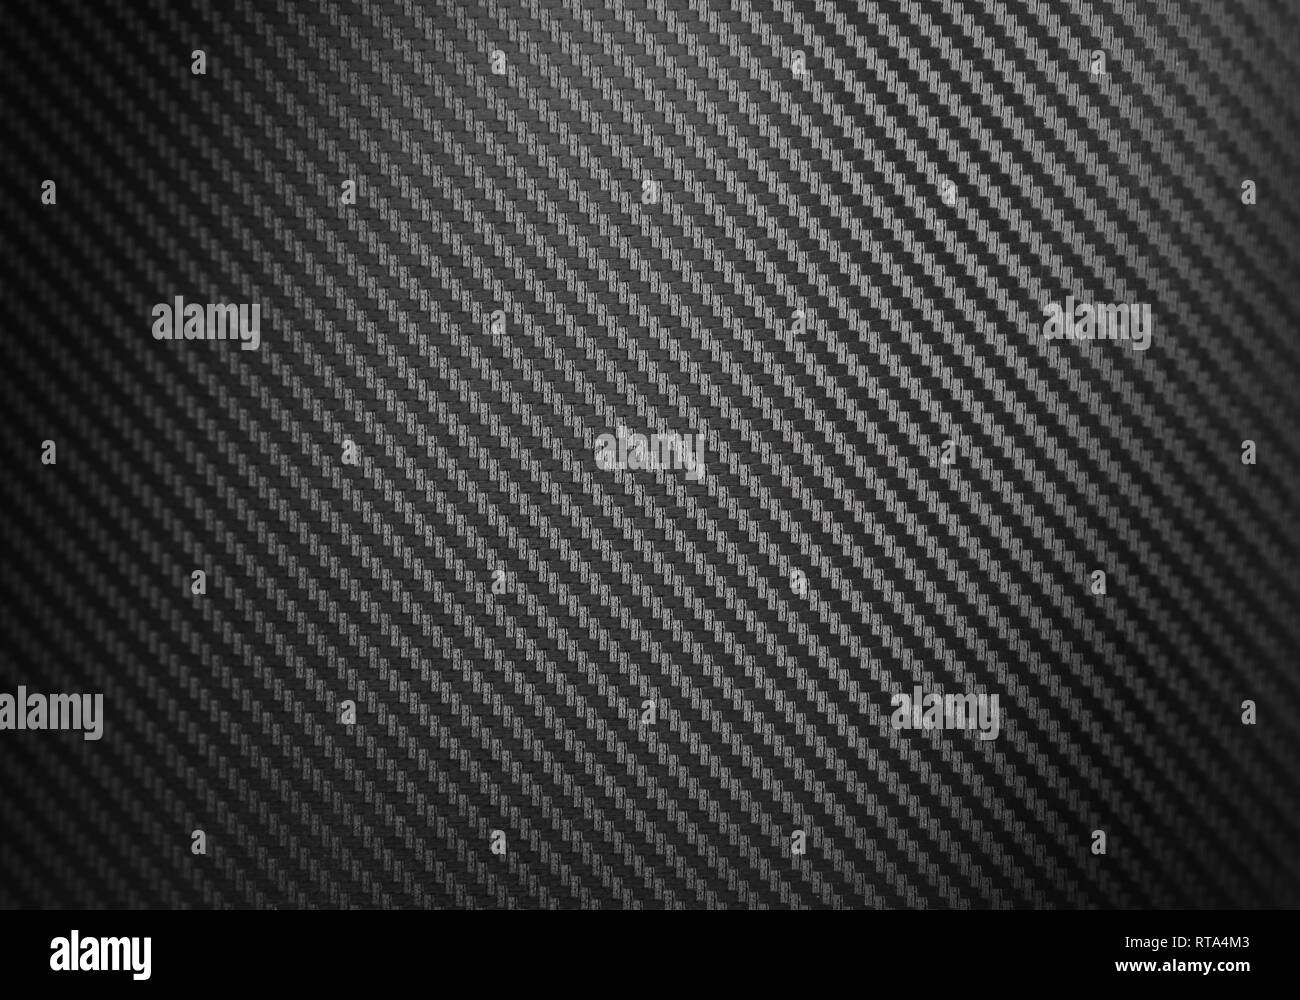 Metallic shiny texture of black carbon fiber self-adhesive paper. Material for racing car modification. Material design for background Stock Photo